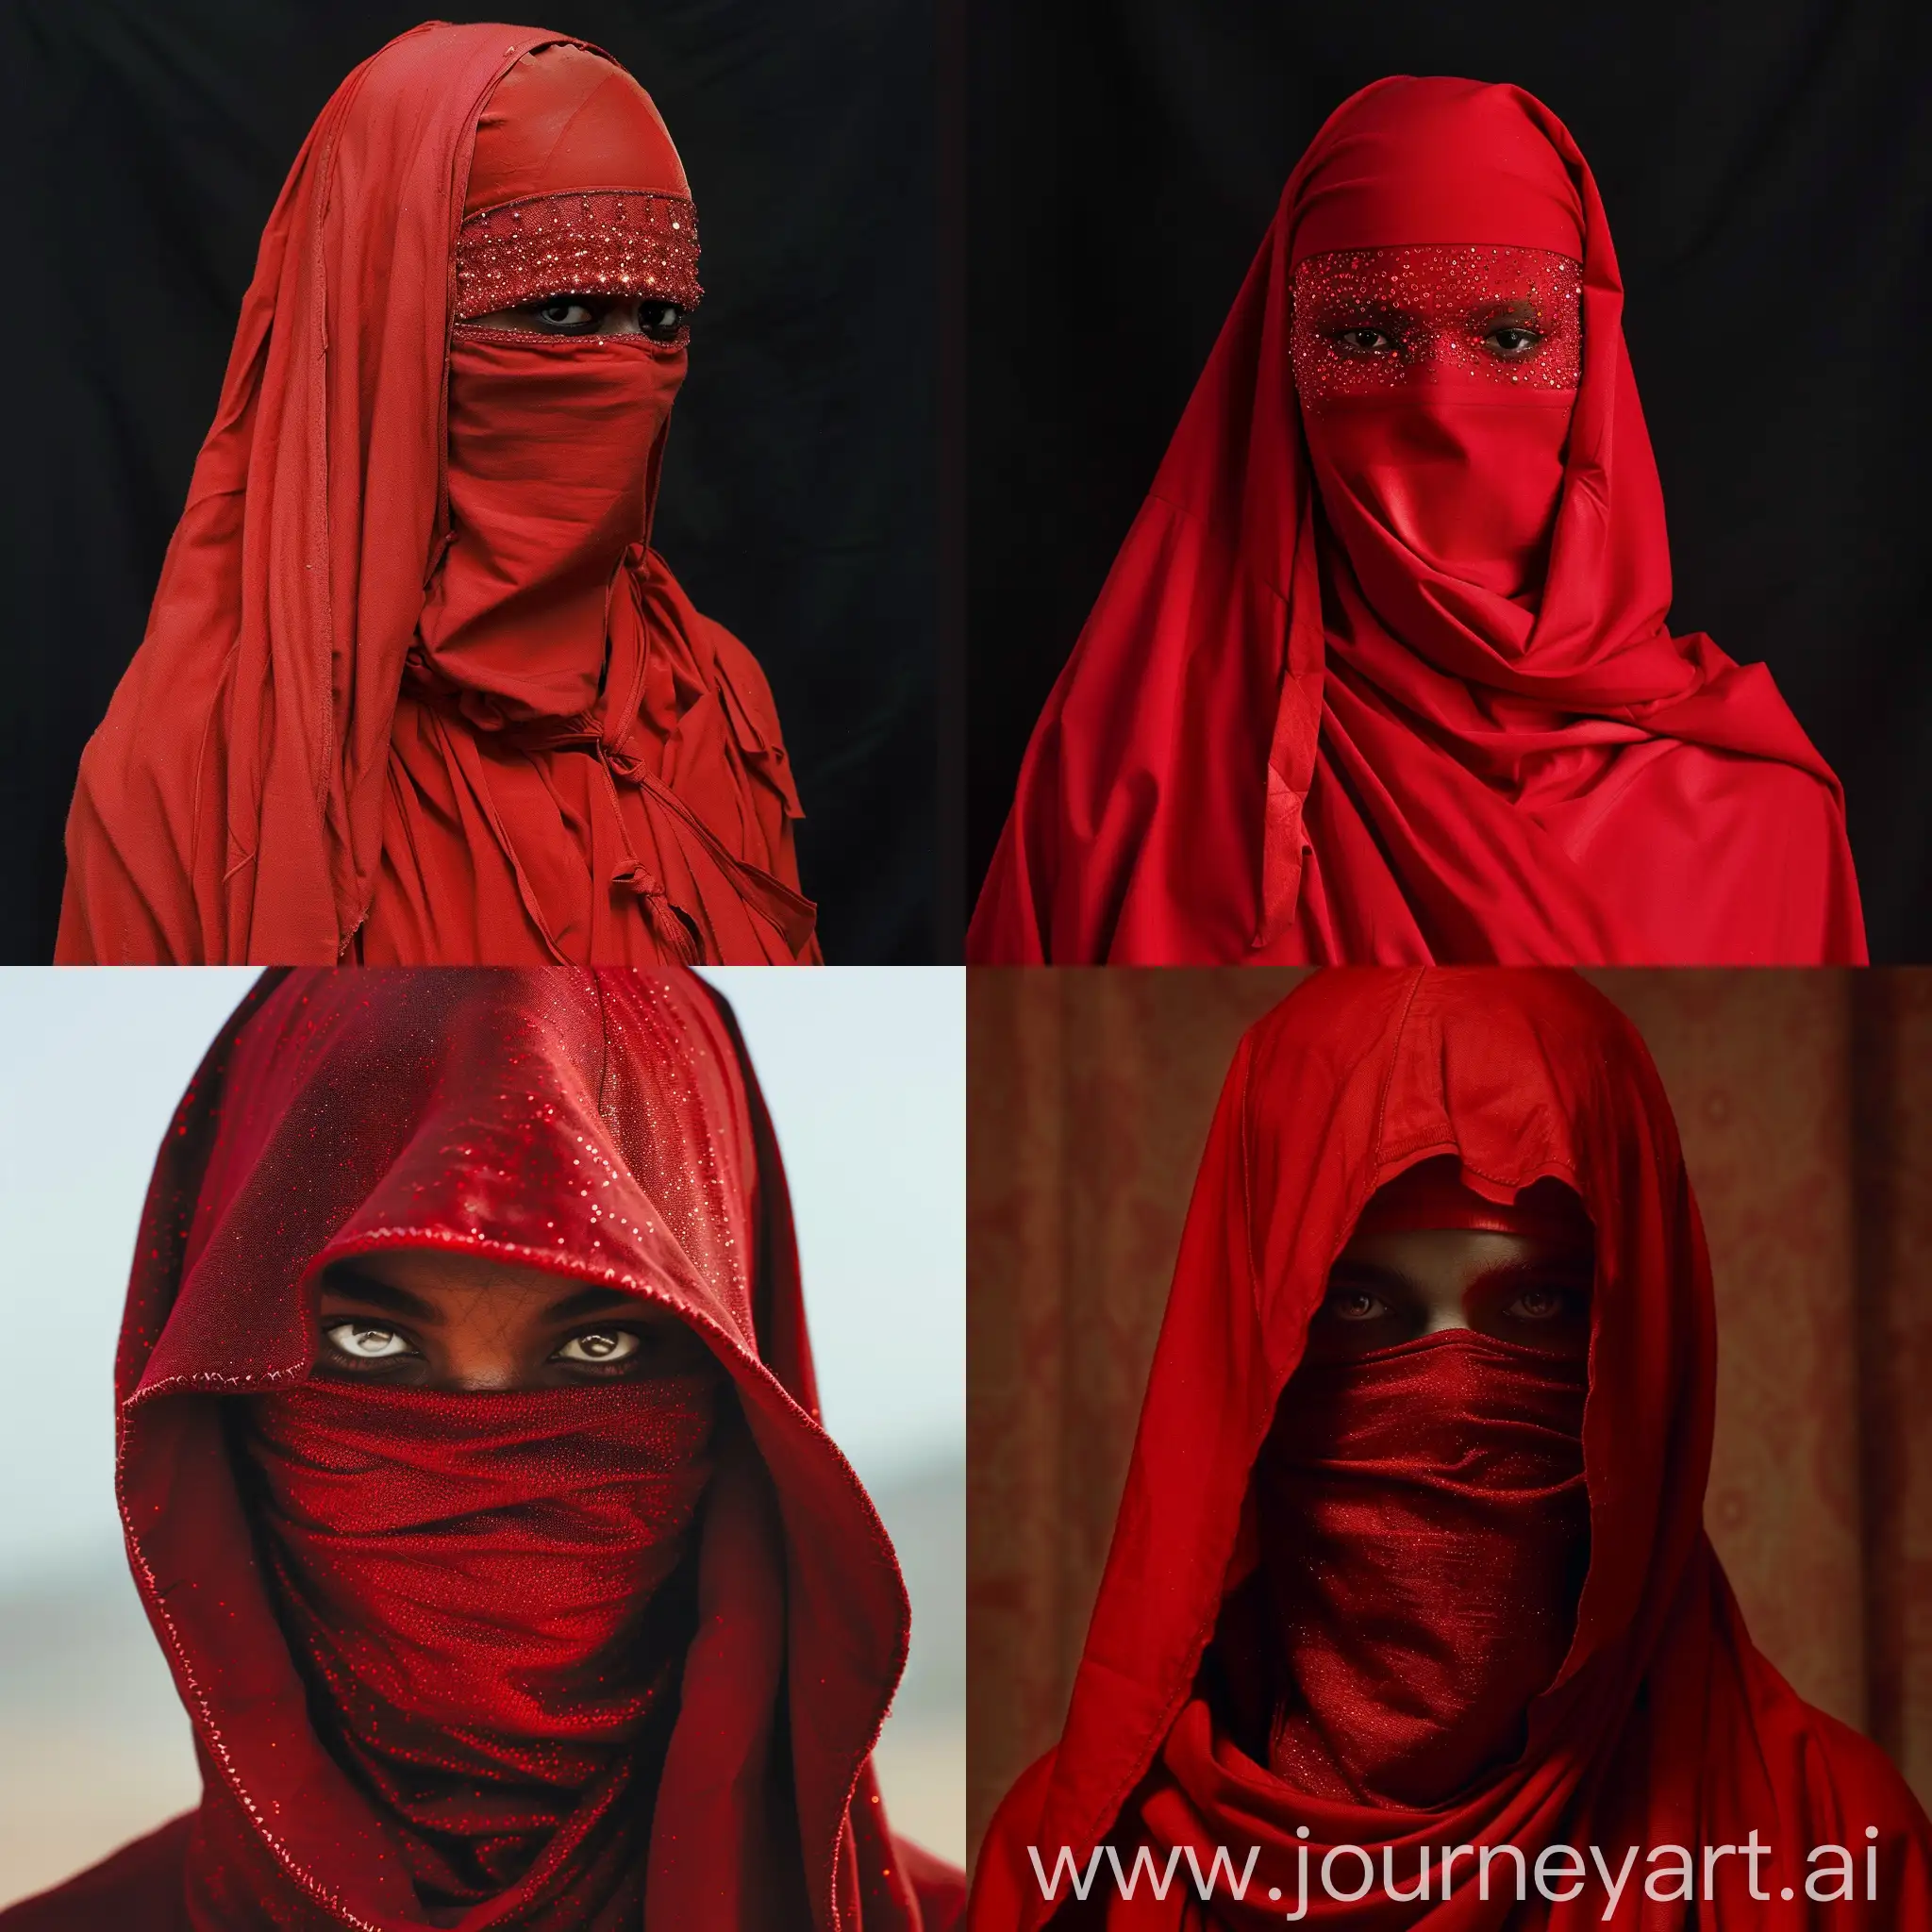 Red-Hood-with-Religious-Clothing-in-Kanye-Style-Margiela-Fashion